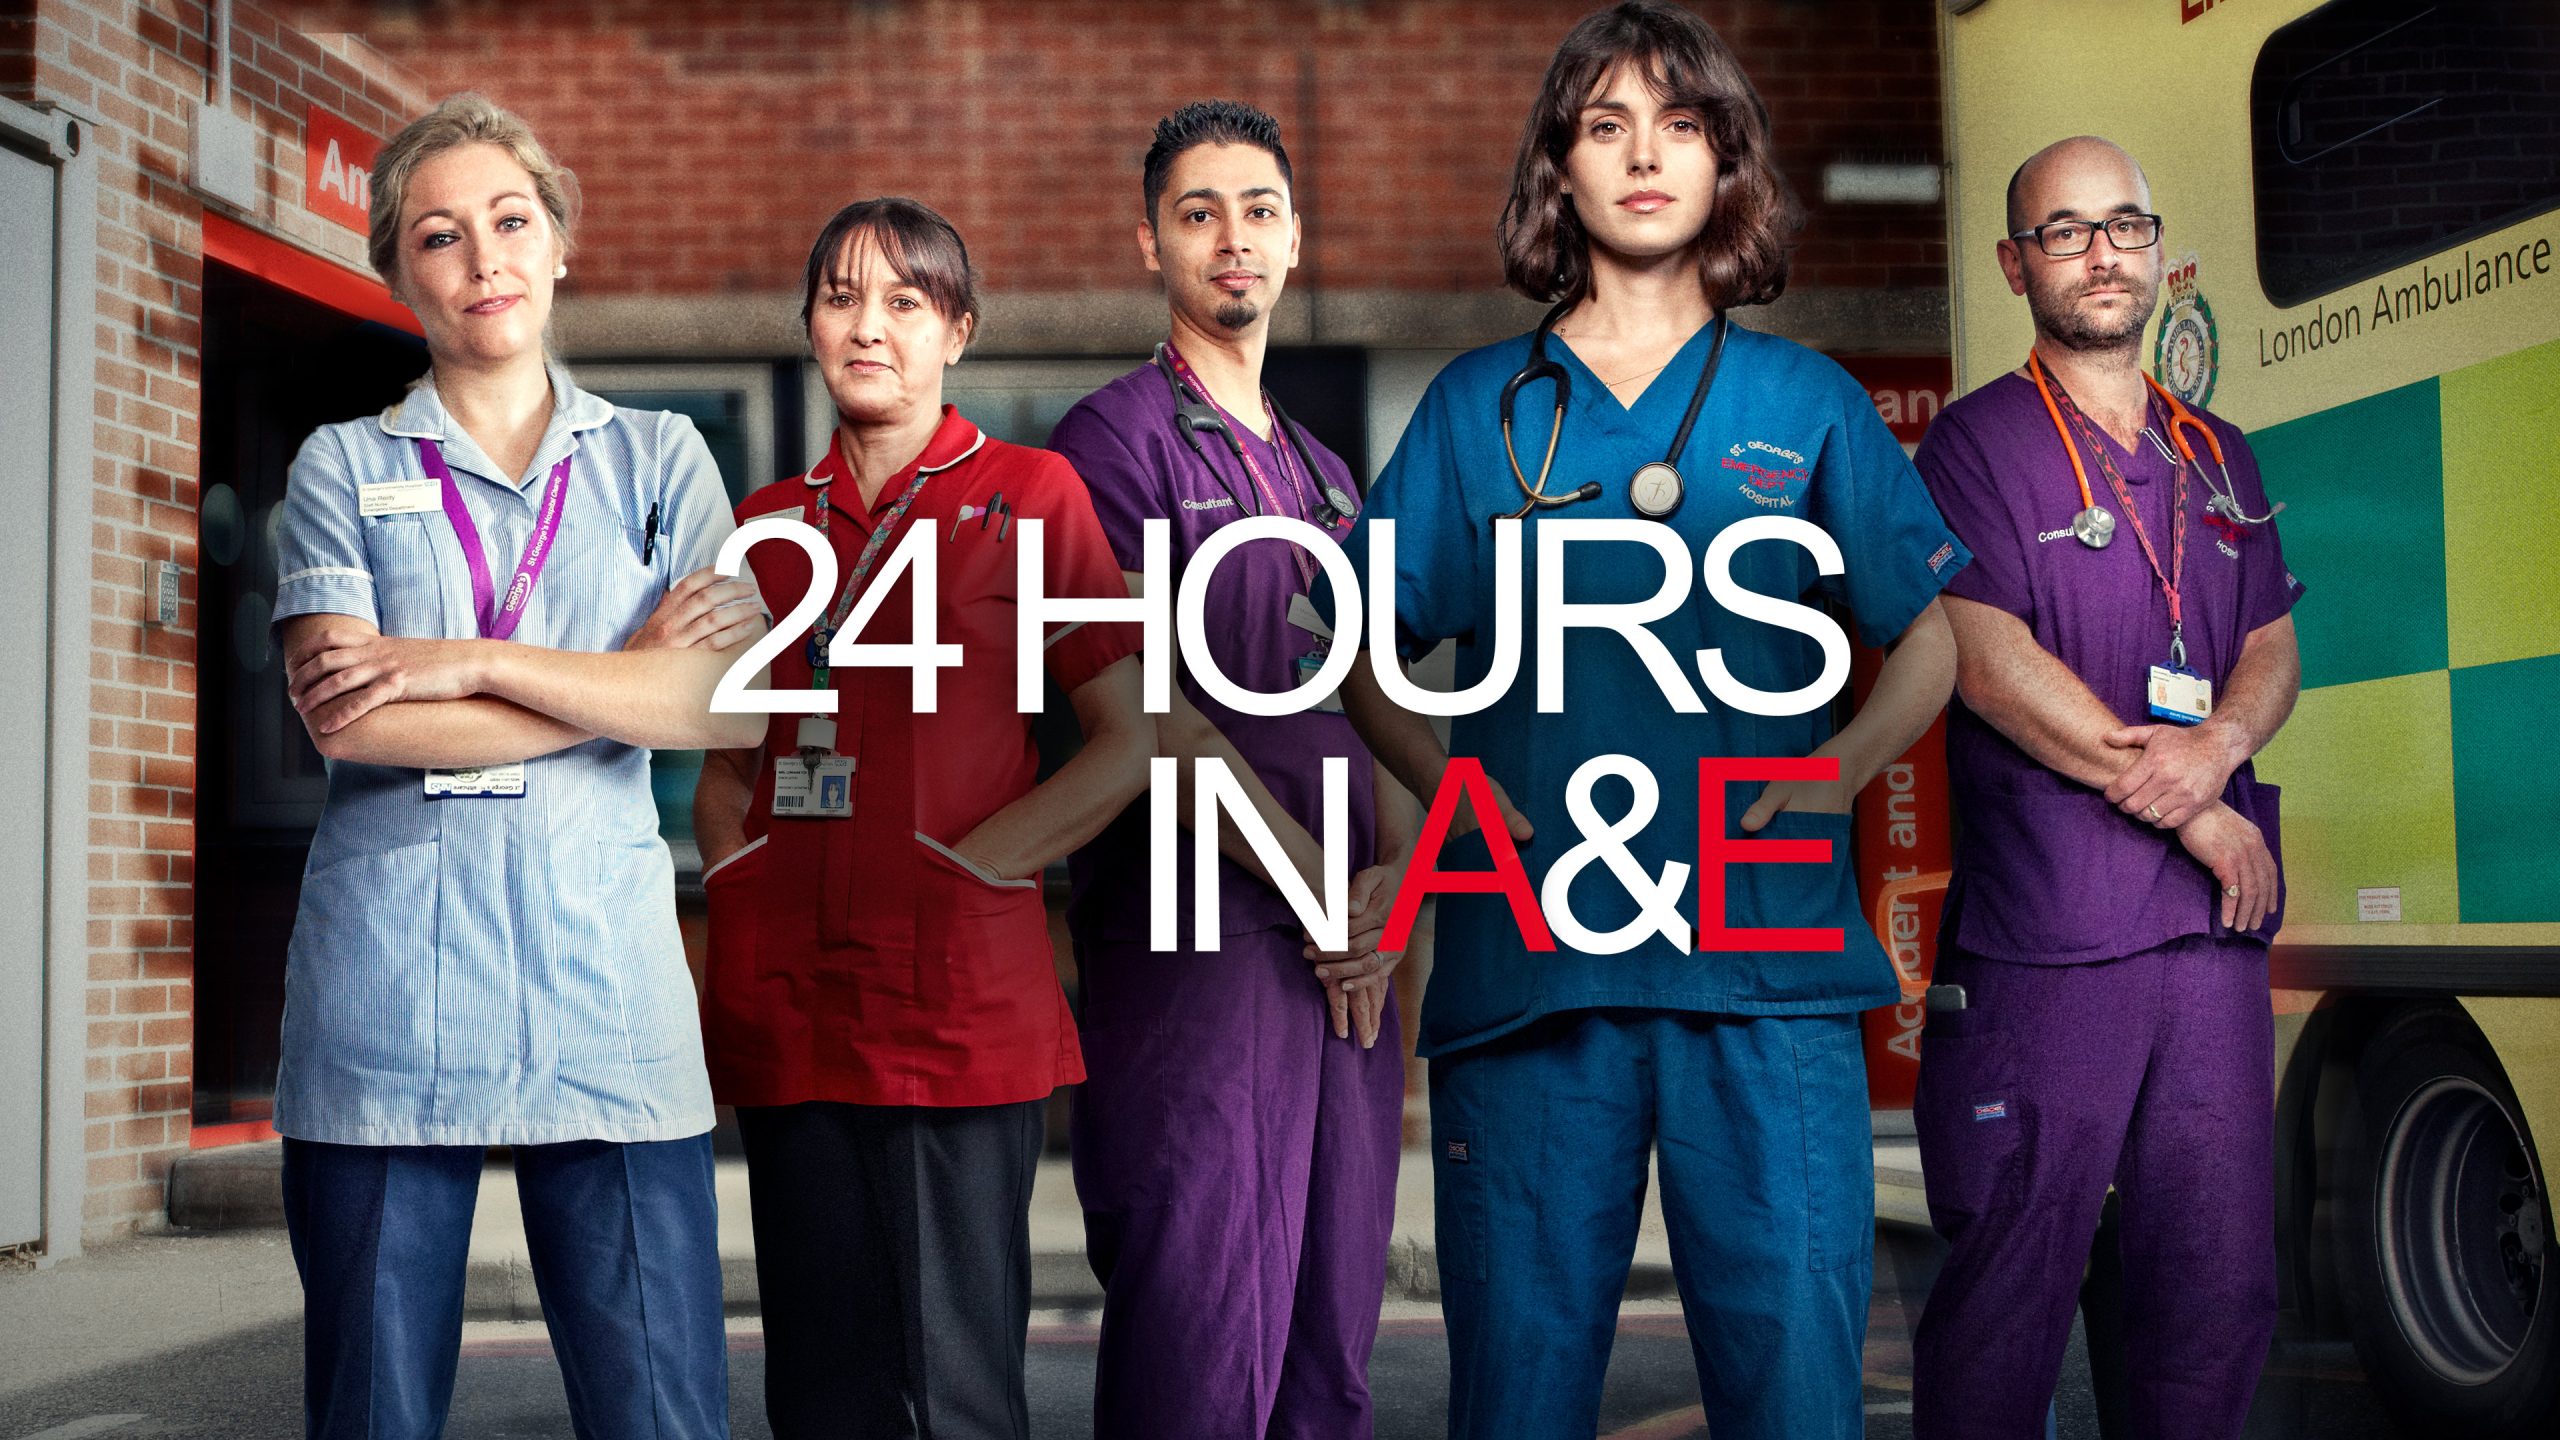 Q&A with Producer/Director Fiona Udahemuka – 24hrs in A&E, Ambulance, Muslims like us.